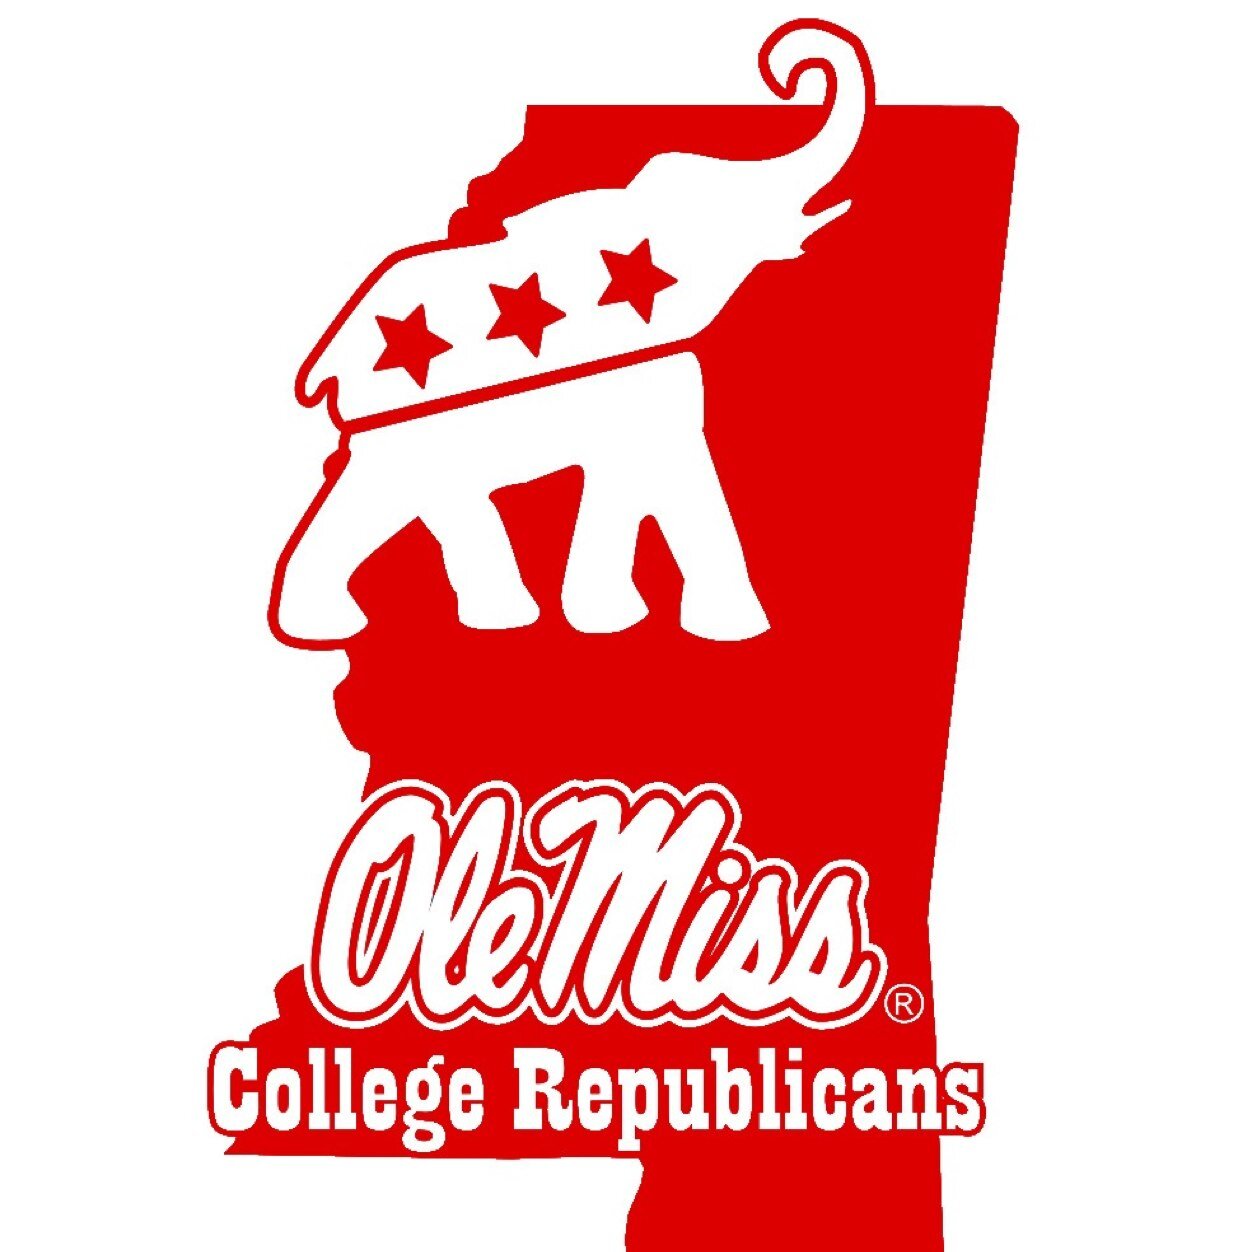 The University of Mississippi College Republicans welcomes you to the Right side of campus where we're building the GOP.
Be the elephant in the room.